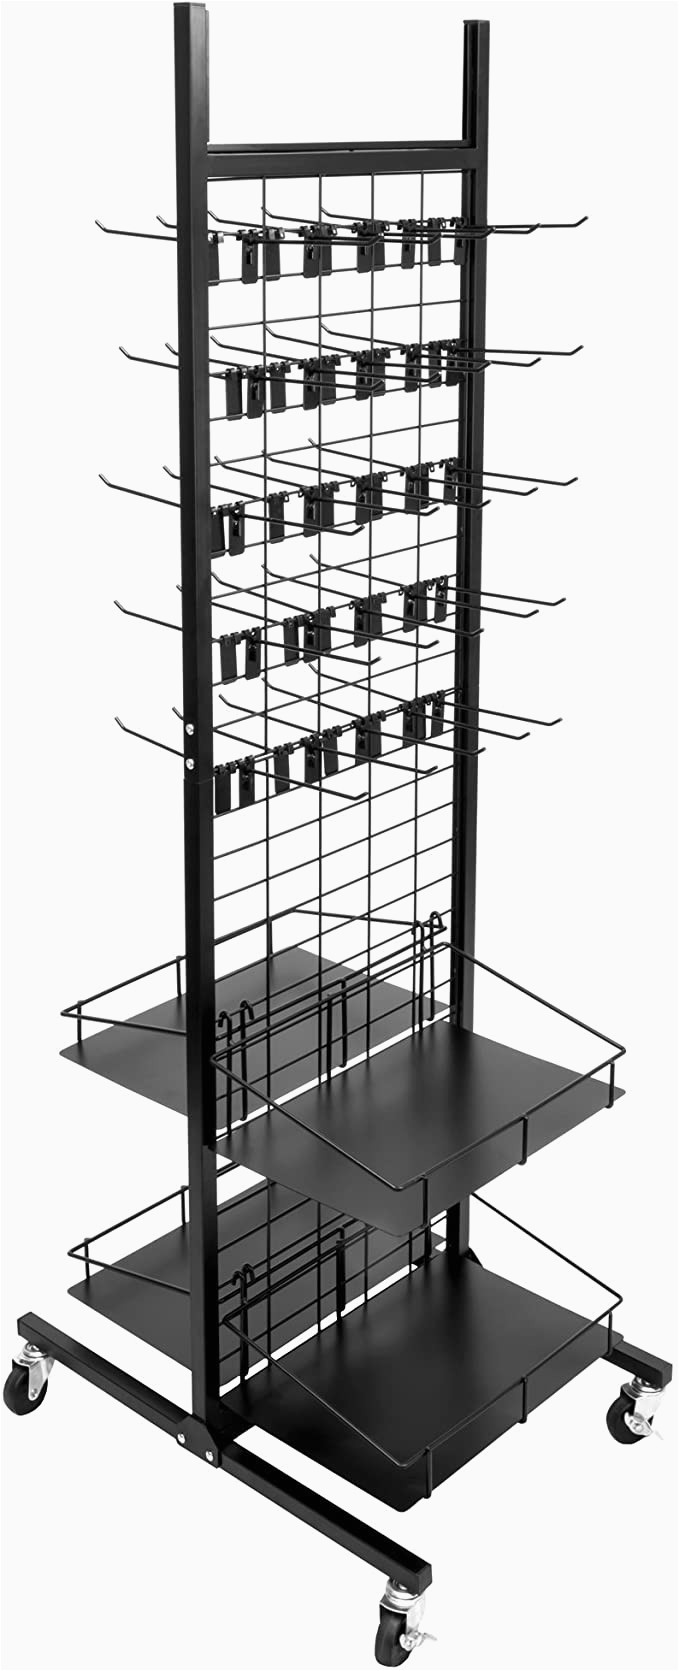 Used area Rug Display Racks for Sale Rolling Retail Display Merchandising Rack Store Fixture 66" Tall X 28" Footprint Includes 50 Peg Hooks and 4 Shelves by Brybelly